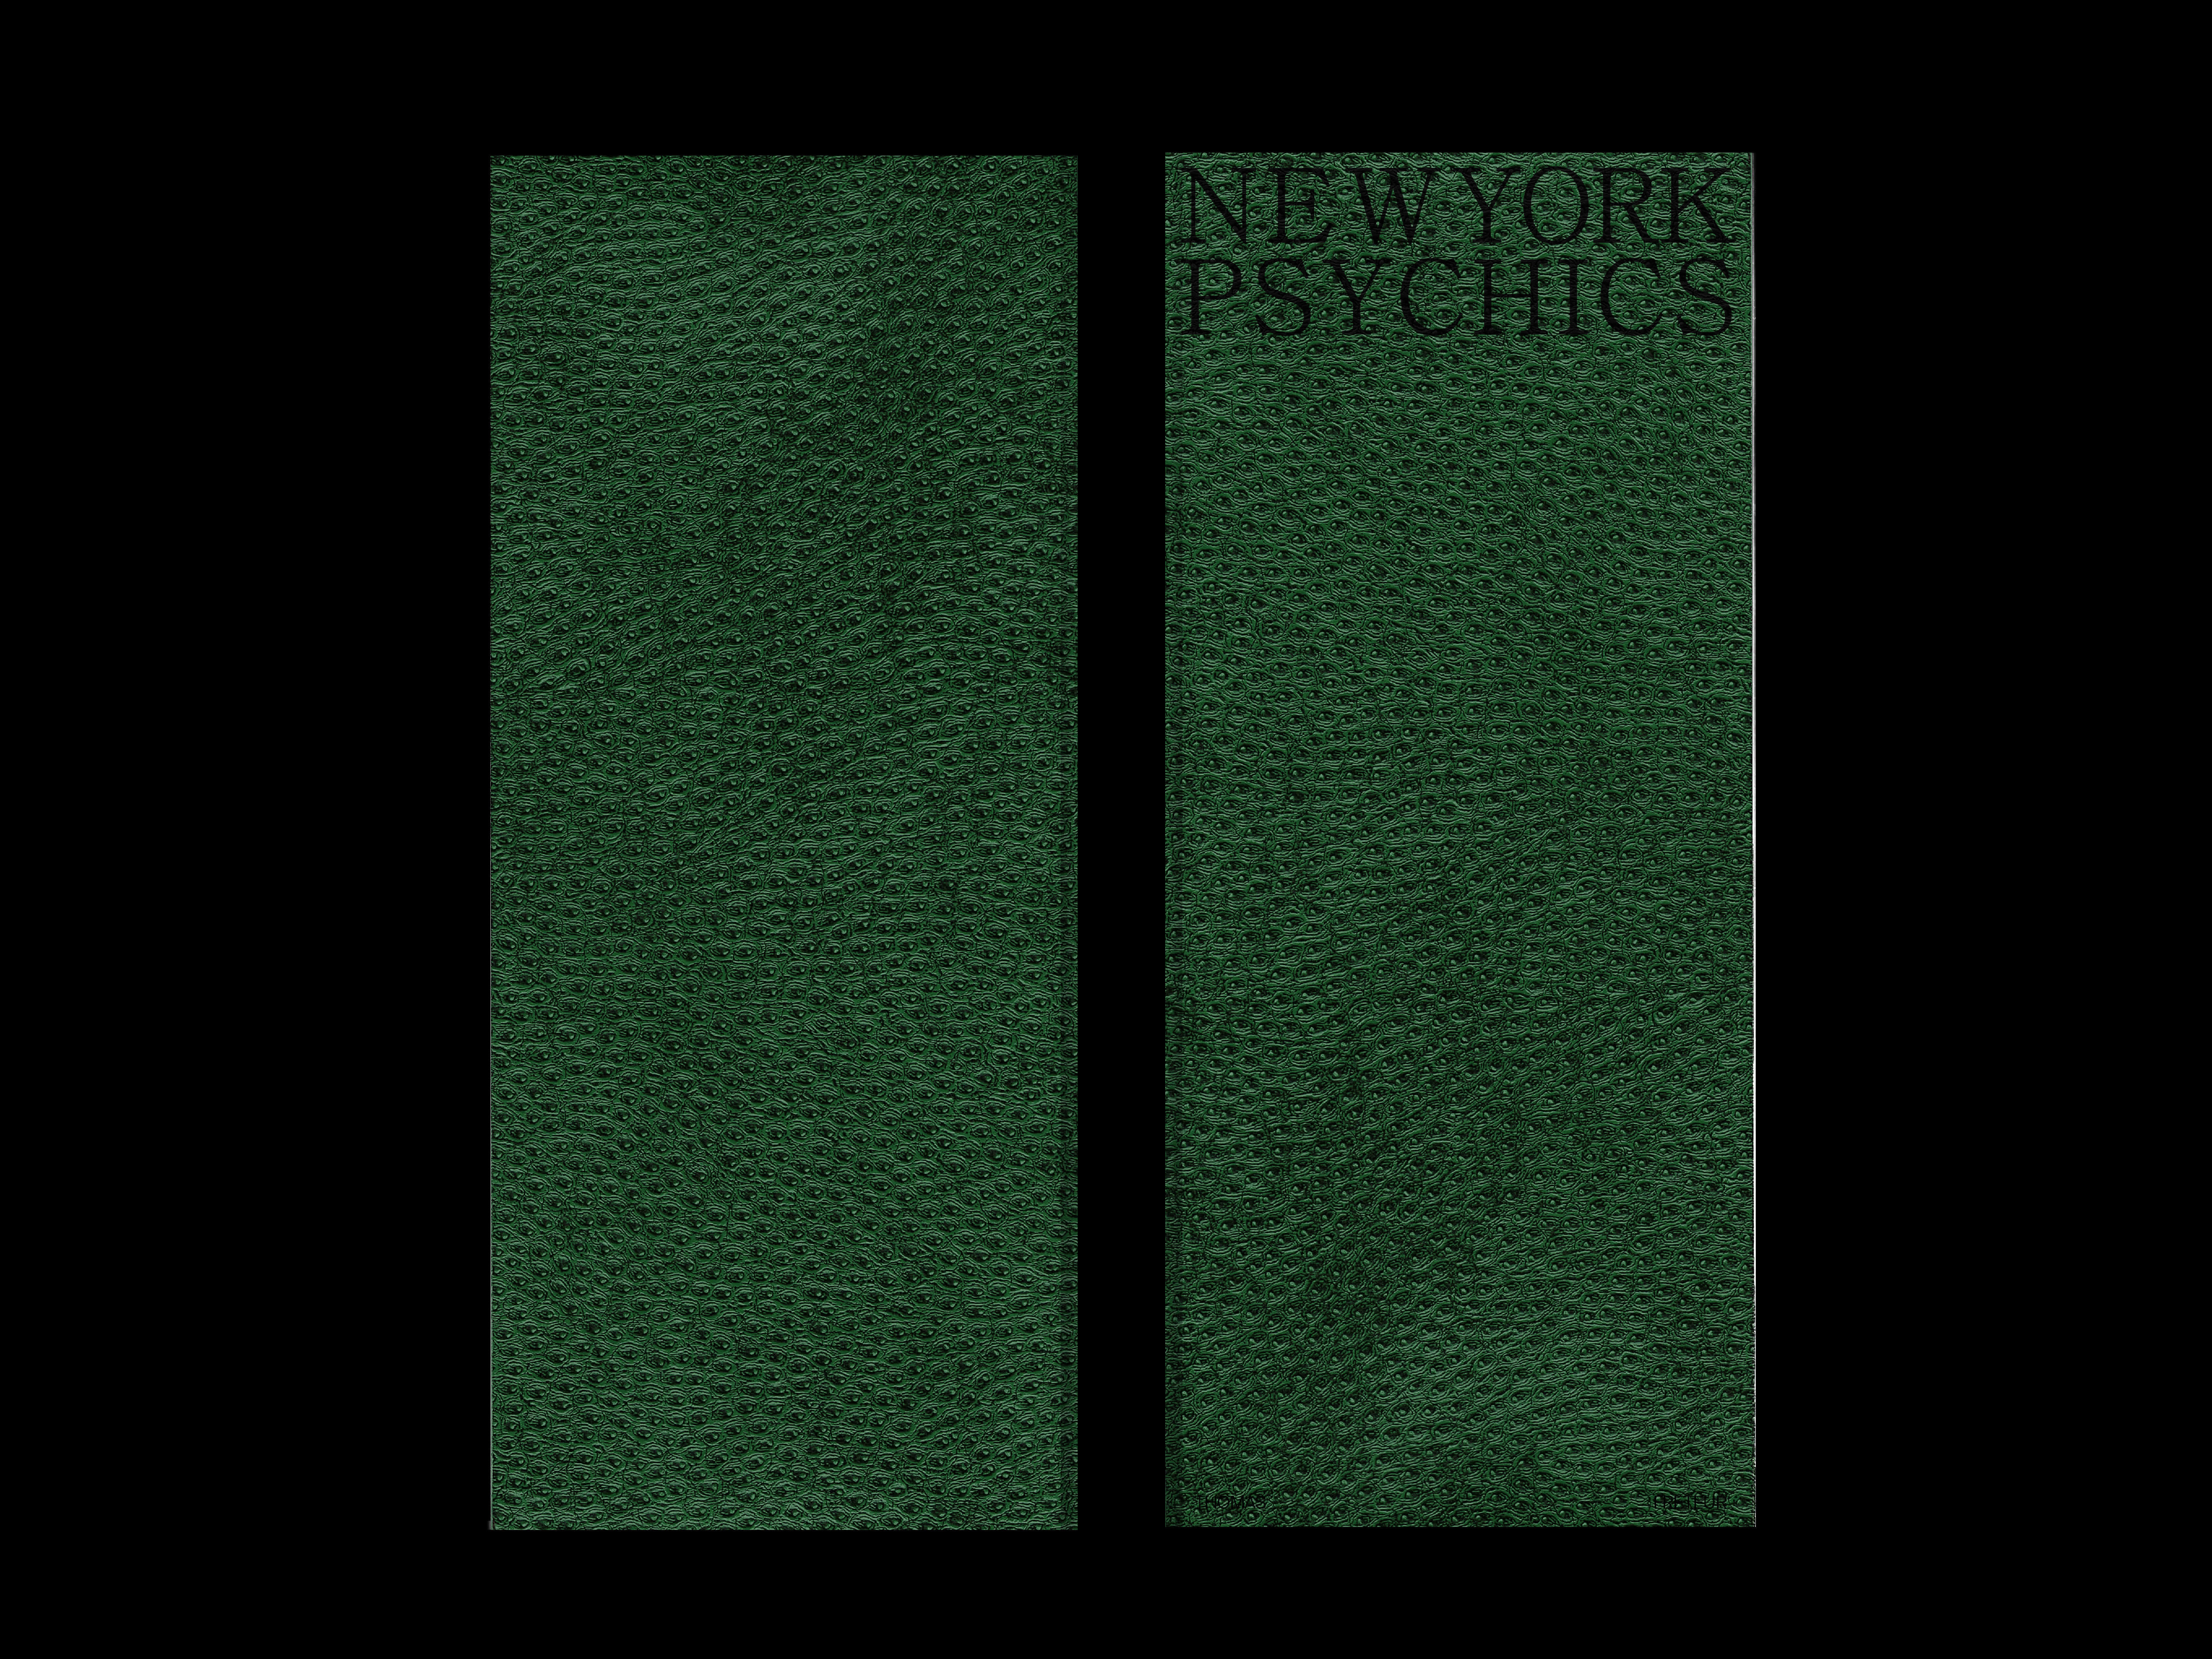 https://www.julienbaiamonte.com/content/1-projects/new-york-psychics/nyc_psychics_scan002_baiamonte_251019.png.png